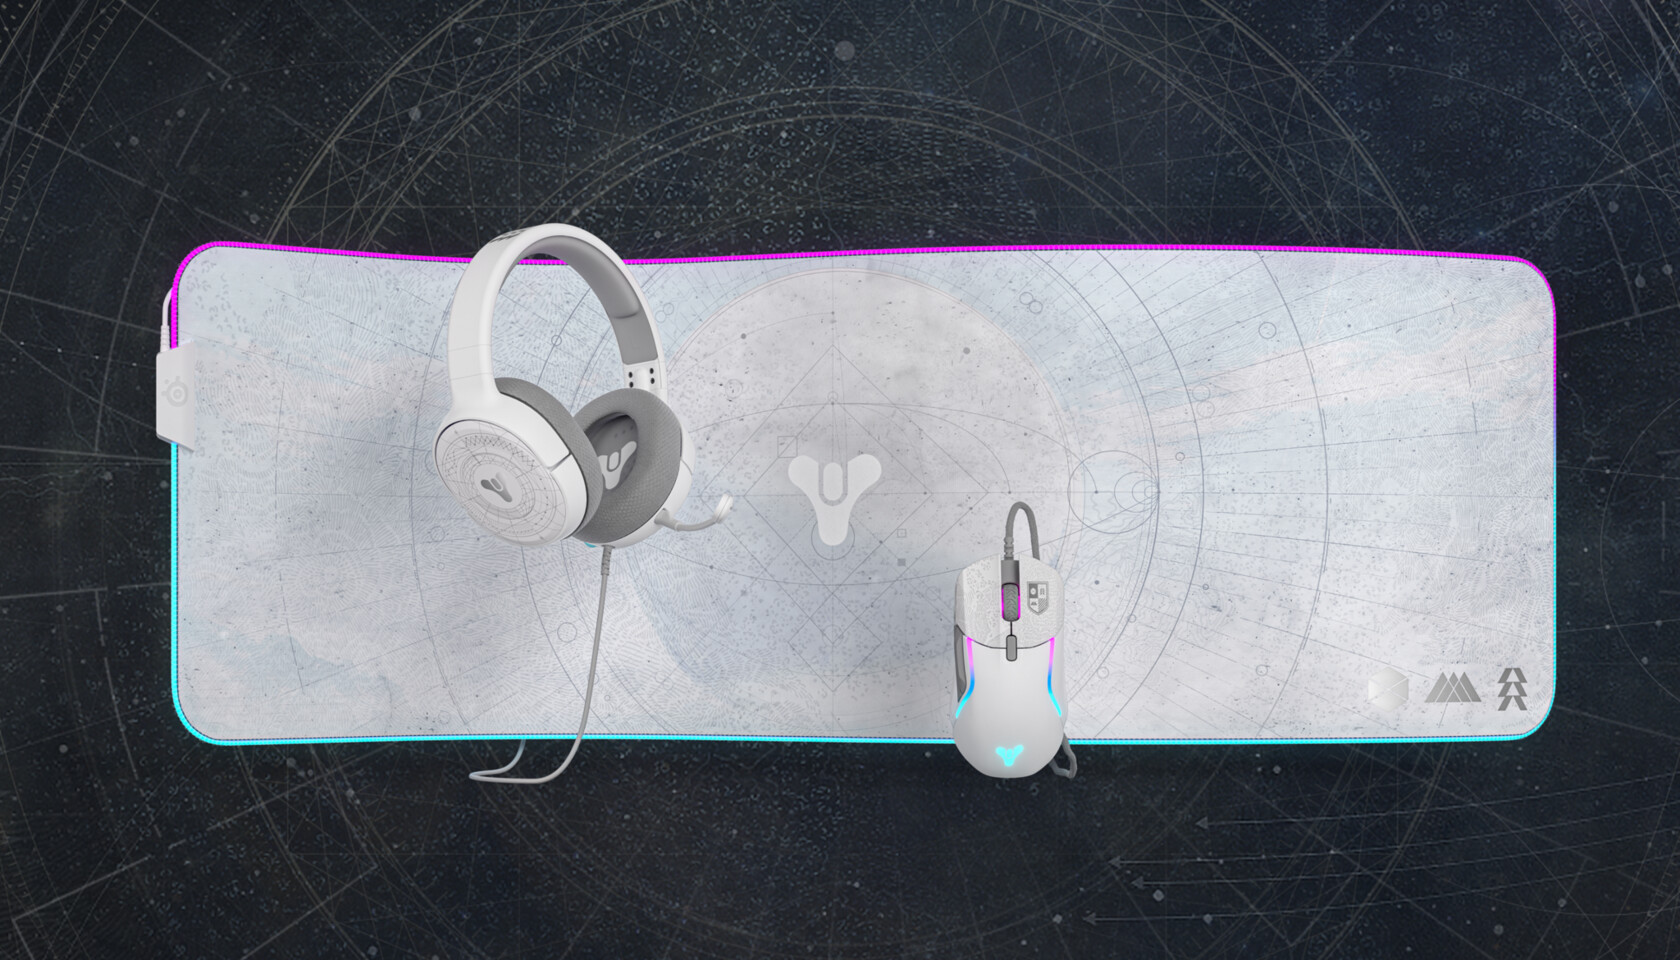 SteelSeries x Bungie Team Up for Limited-Edition Destiny Collection